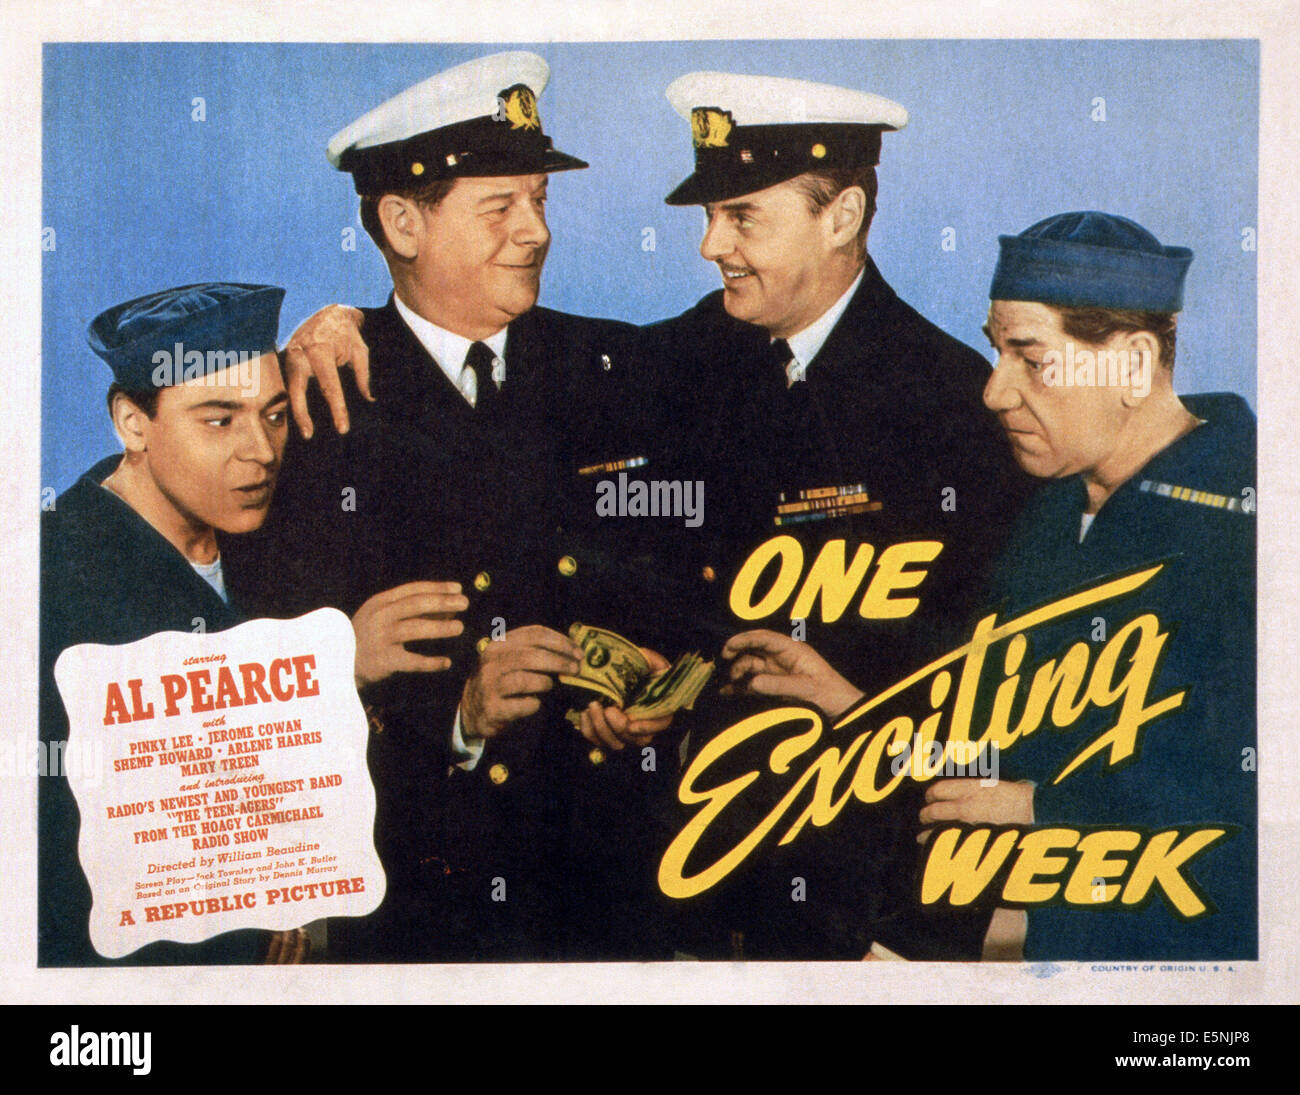 ONE EXCITING WEEK, US lobbycard, from left: Pinky Lee, Al Pearce, Jerome Cowan, Shemp Howard, 1946 Stock Photo